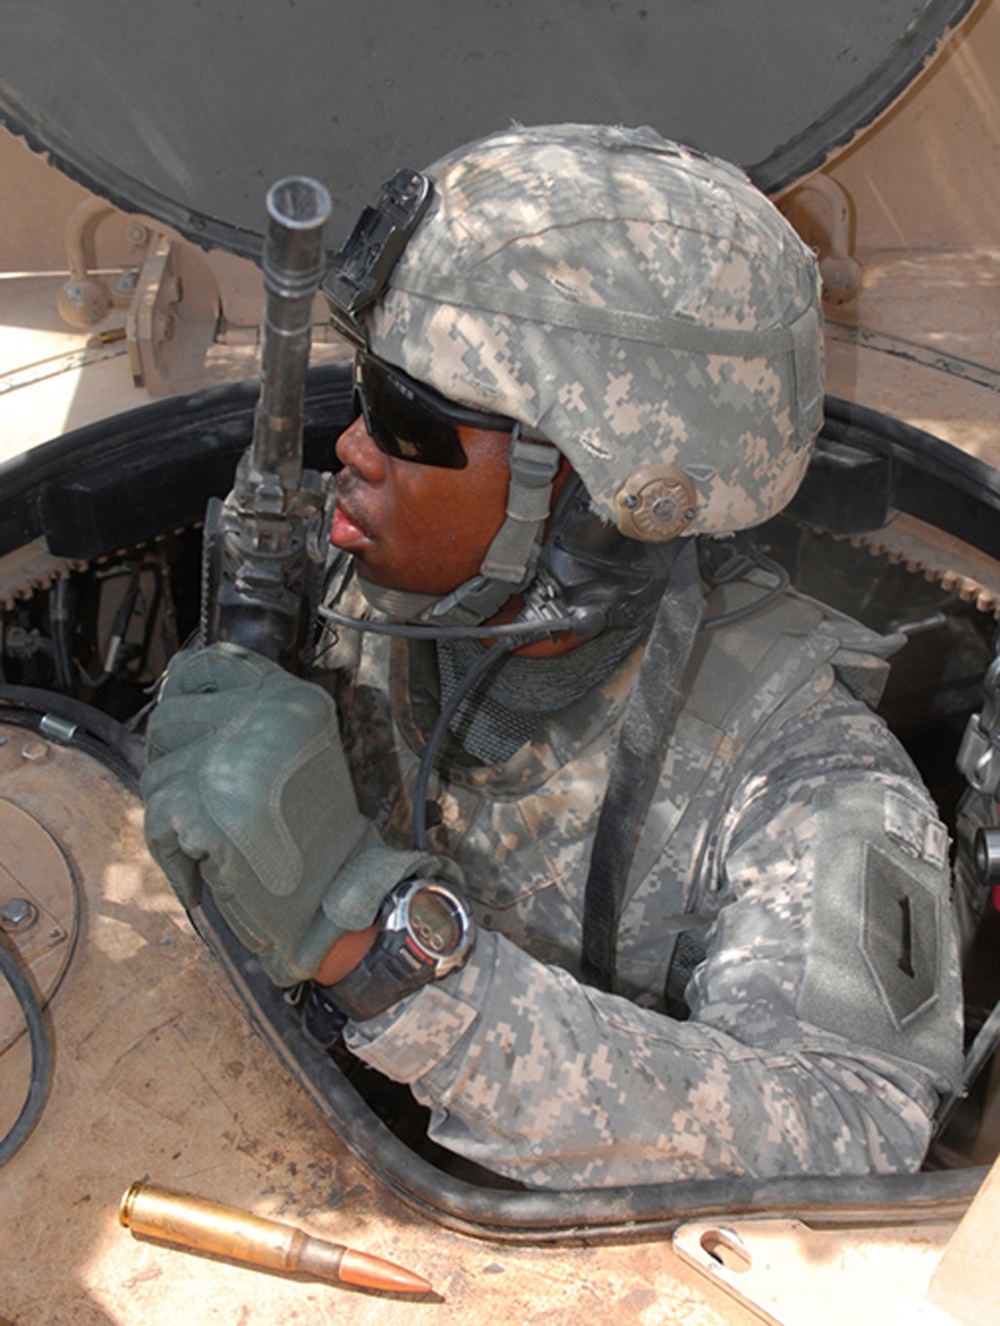 From artillery to infantry: Soldier finds purpose in mission change